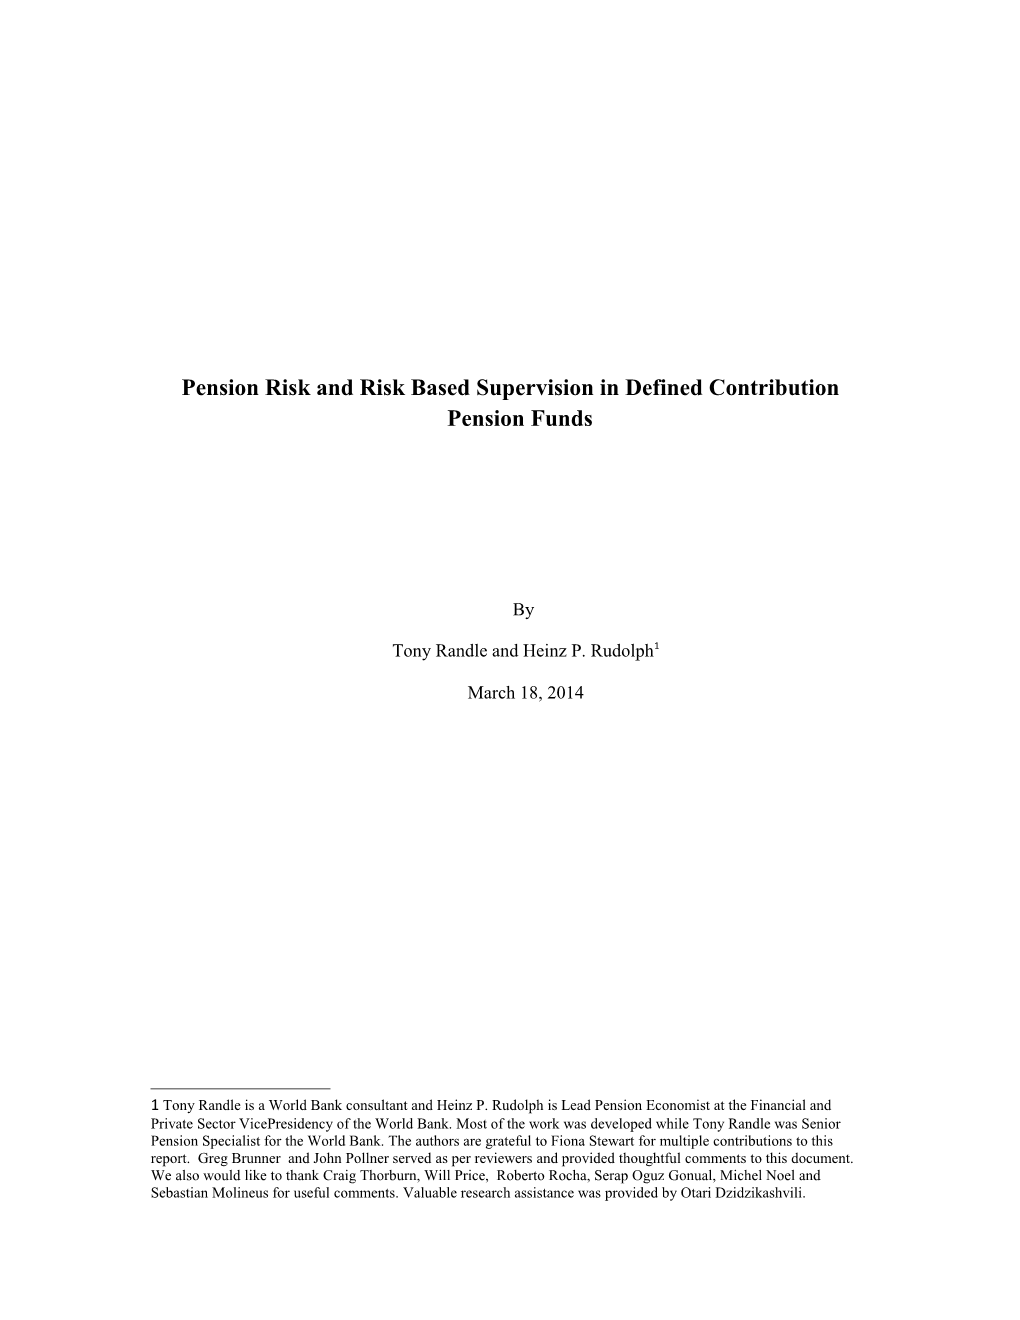 Pension Risk and Risk Based Supervision in Defined Contribution Pension Funds